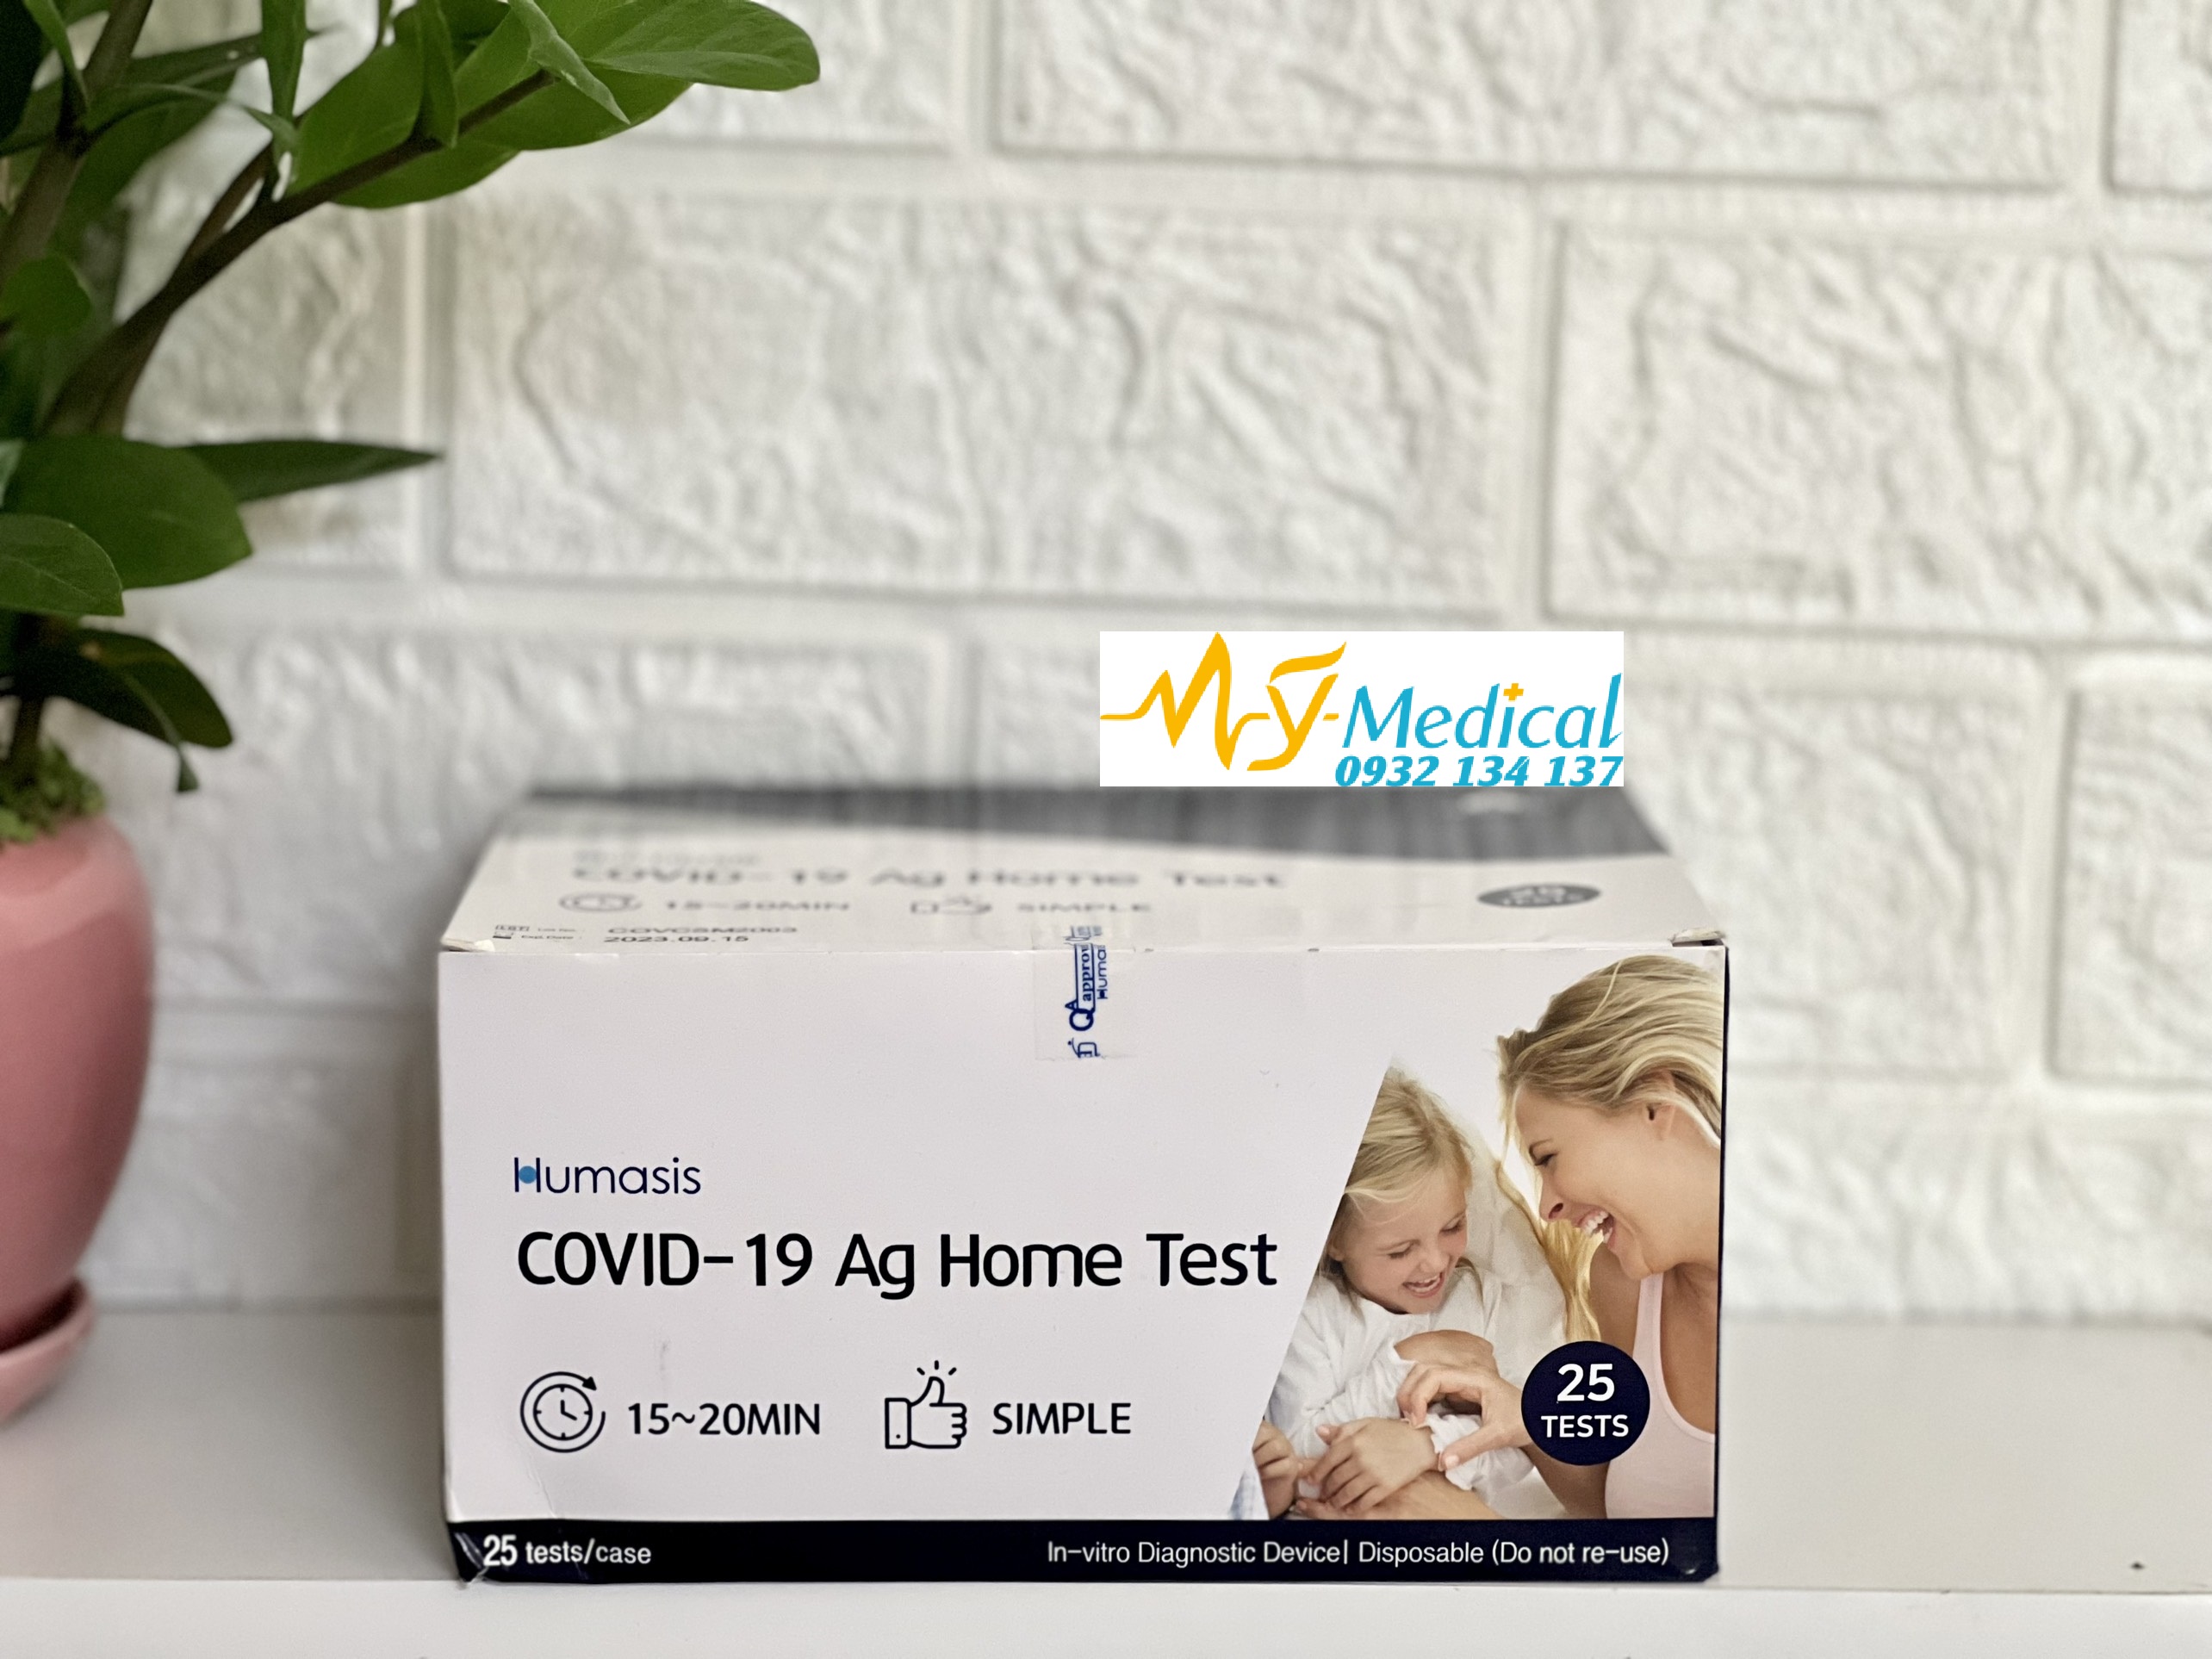 Humasis COVID-19 Ag Home Test Kit (Hộp 25 bộ test)